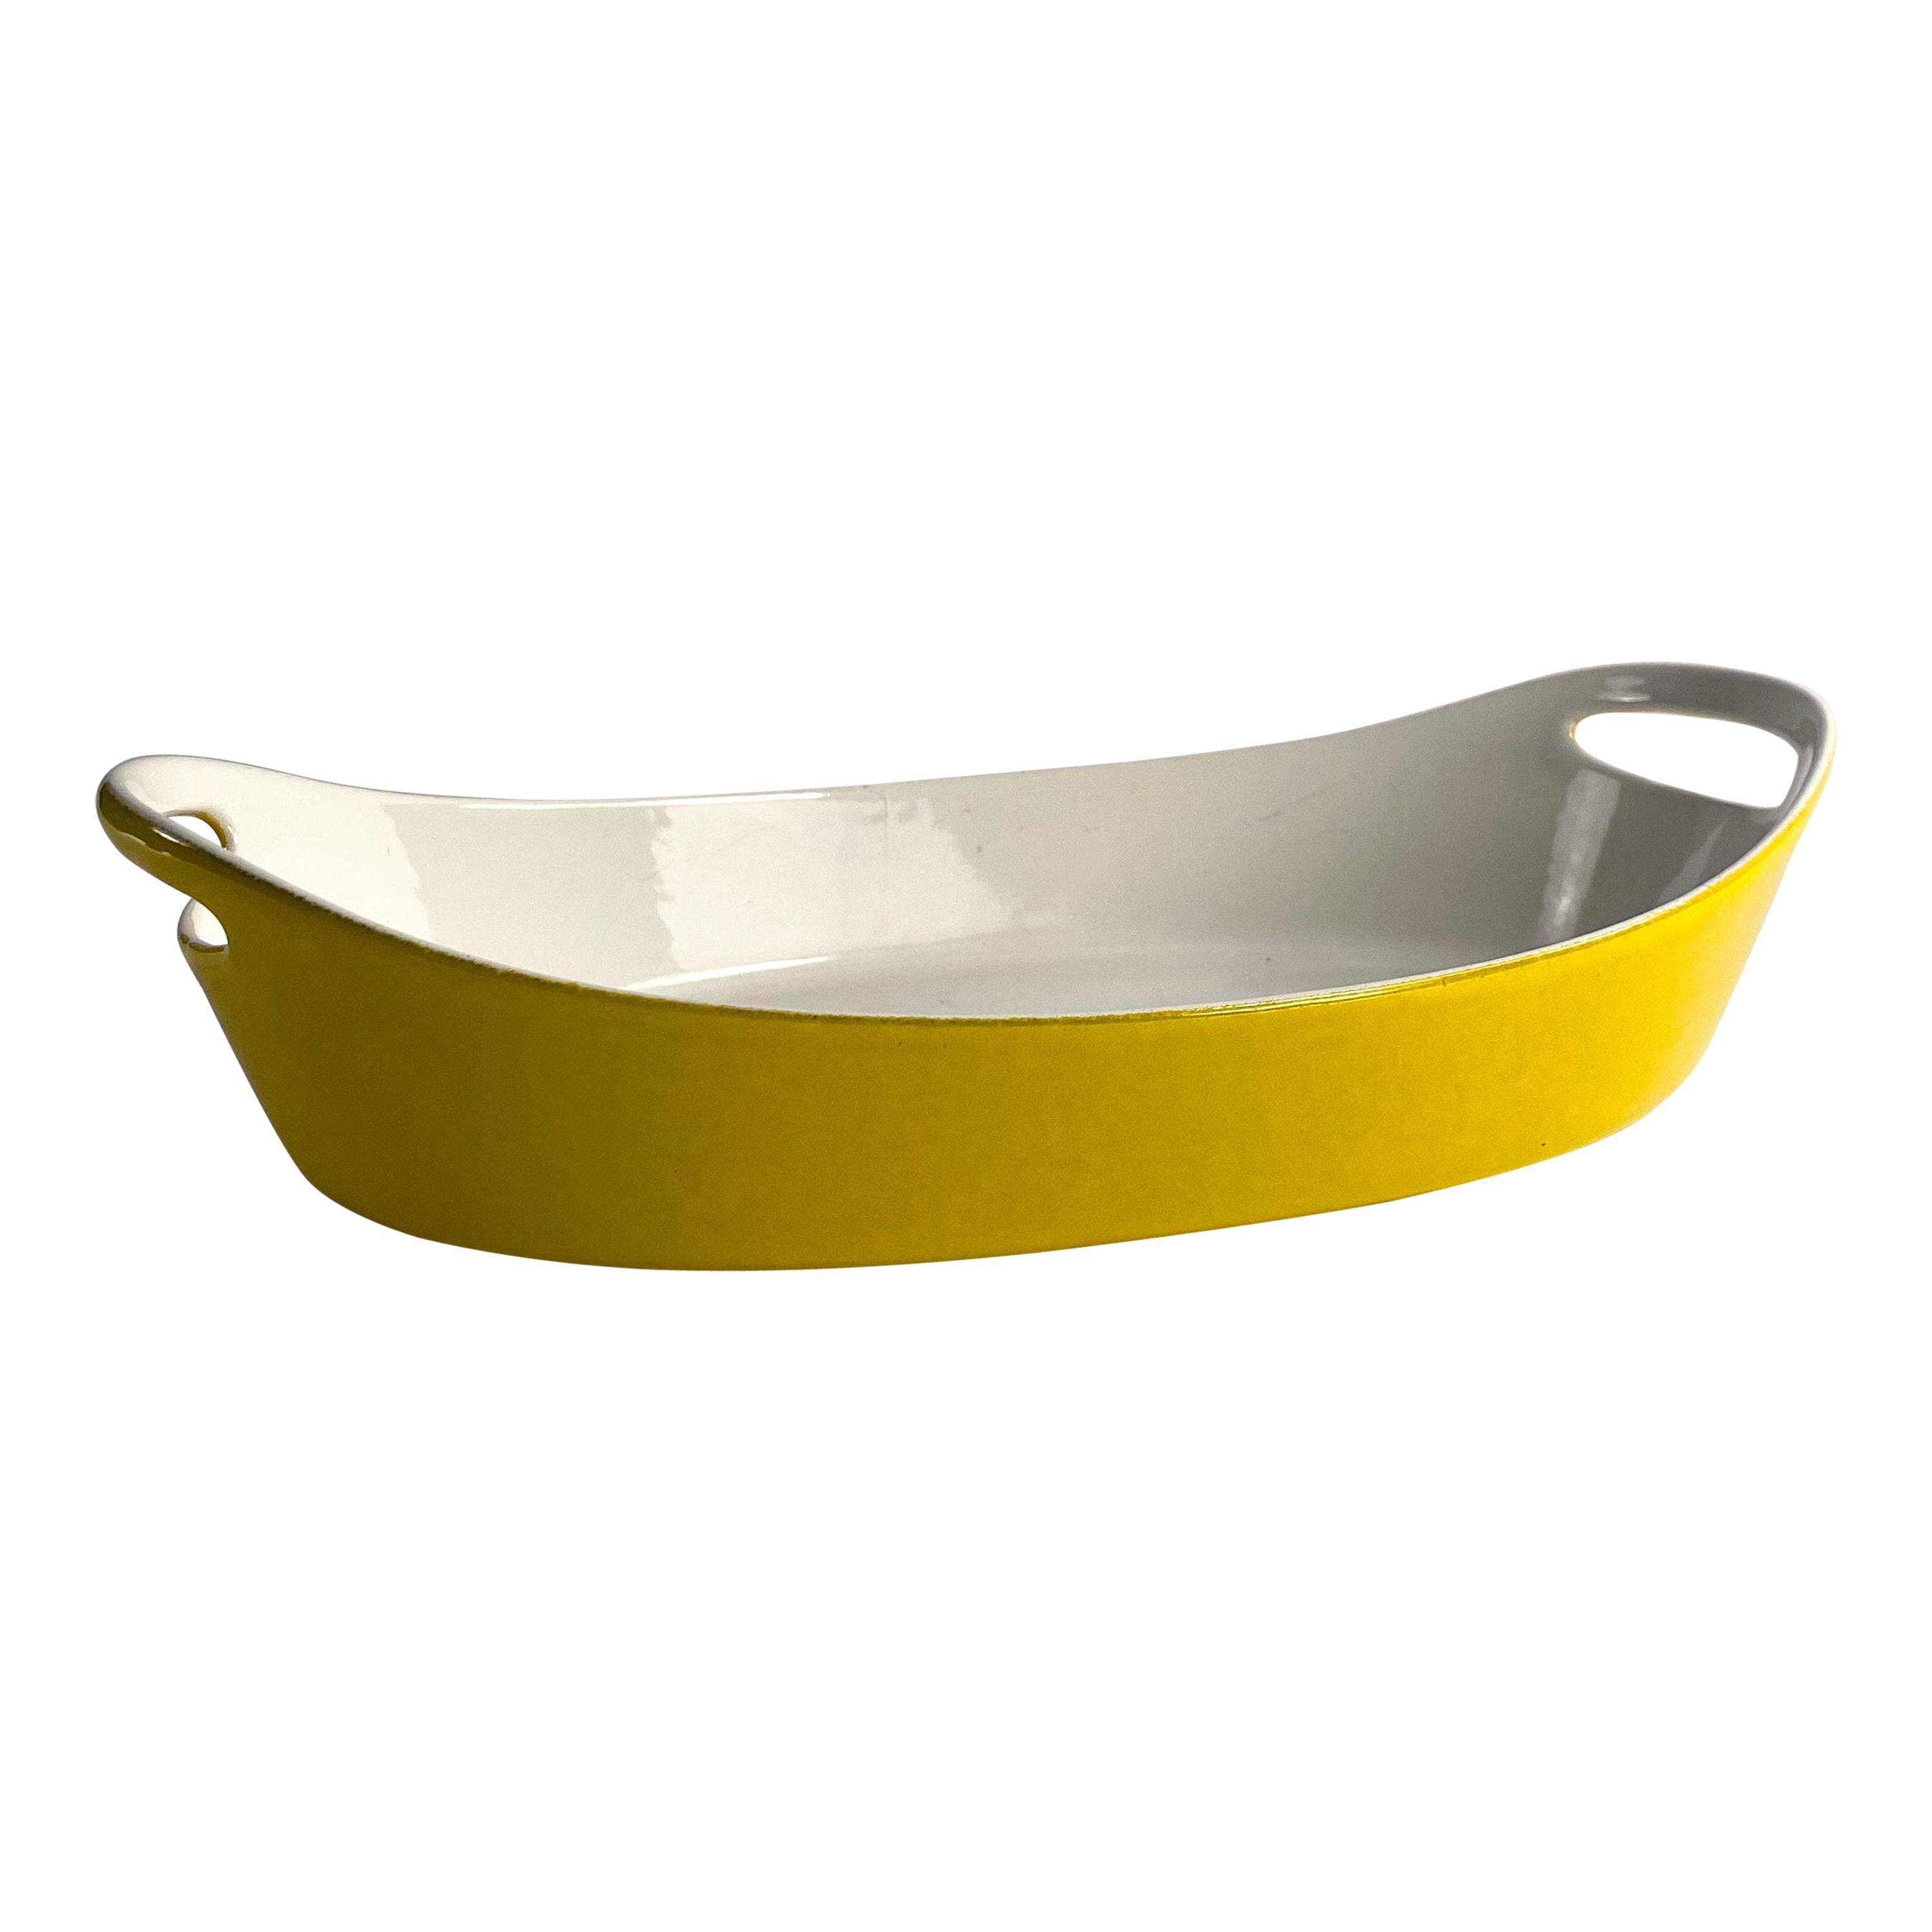 vintage yellow enameled castiron casserole dish by Michael Lax for Copco For Sale